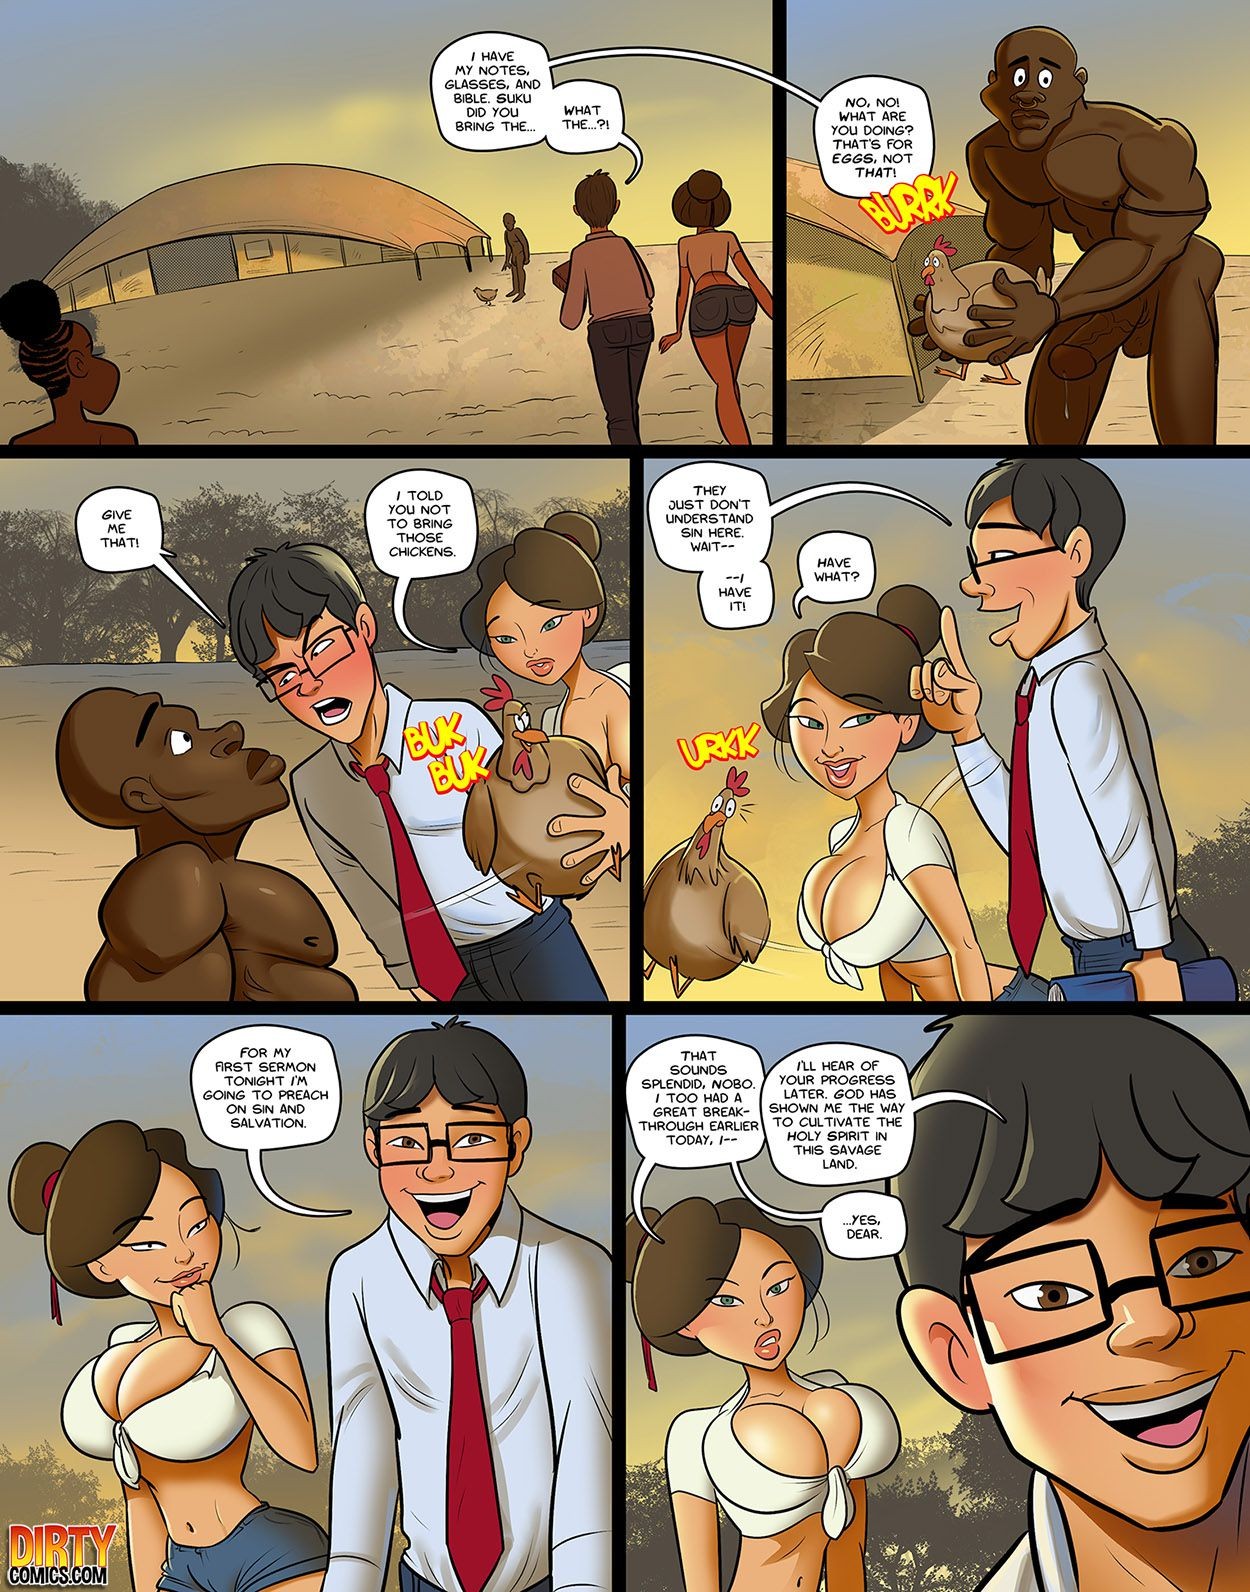 The Missionaries By Dirty Comics Porn Comic english 06